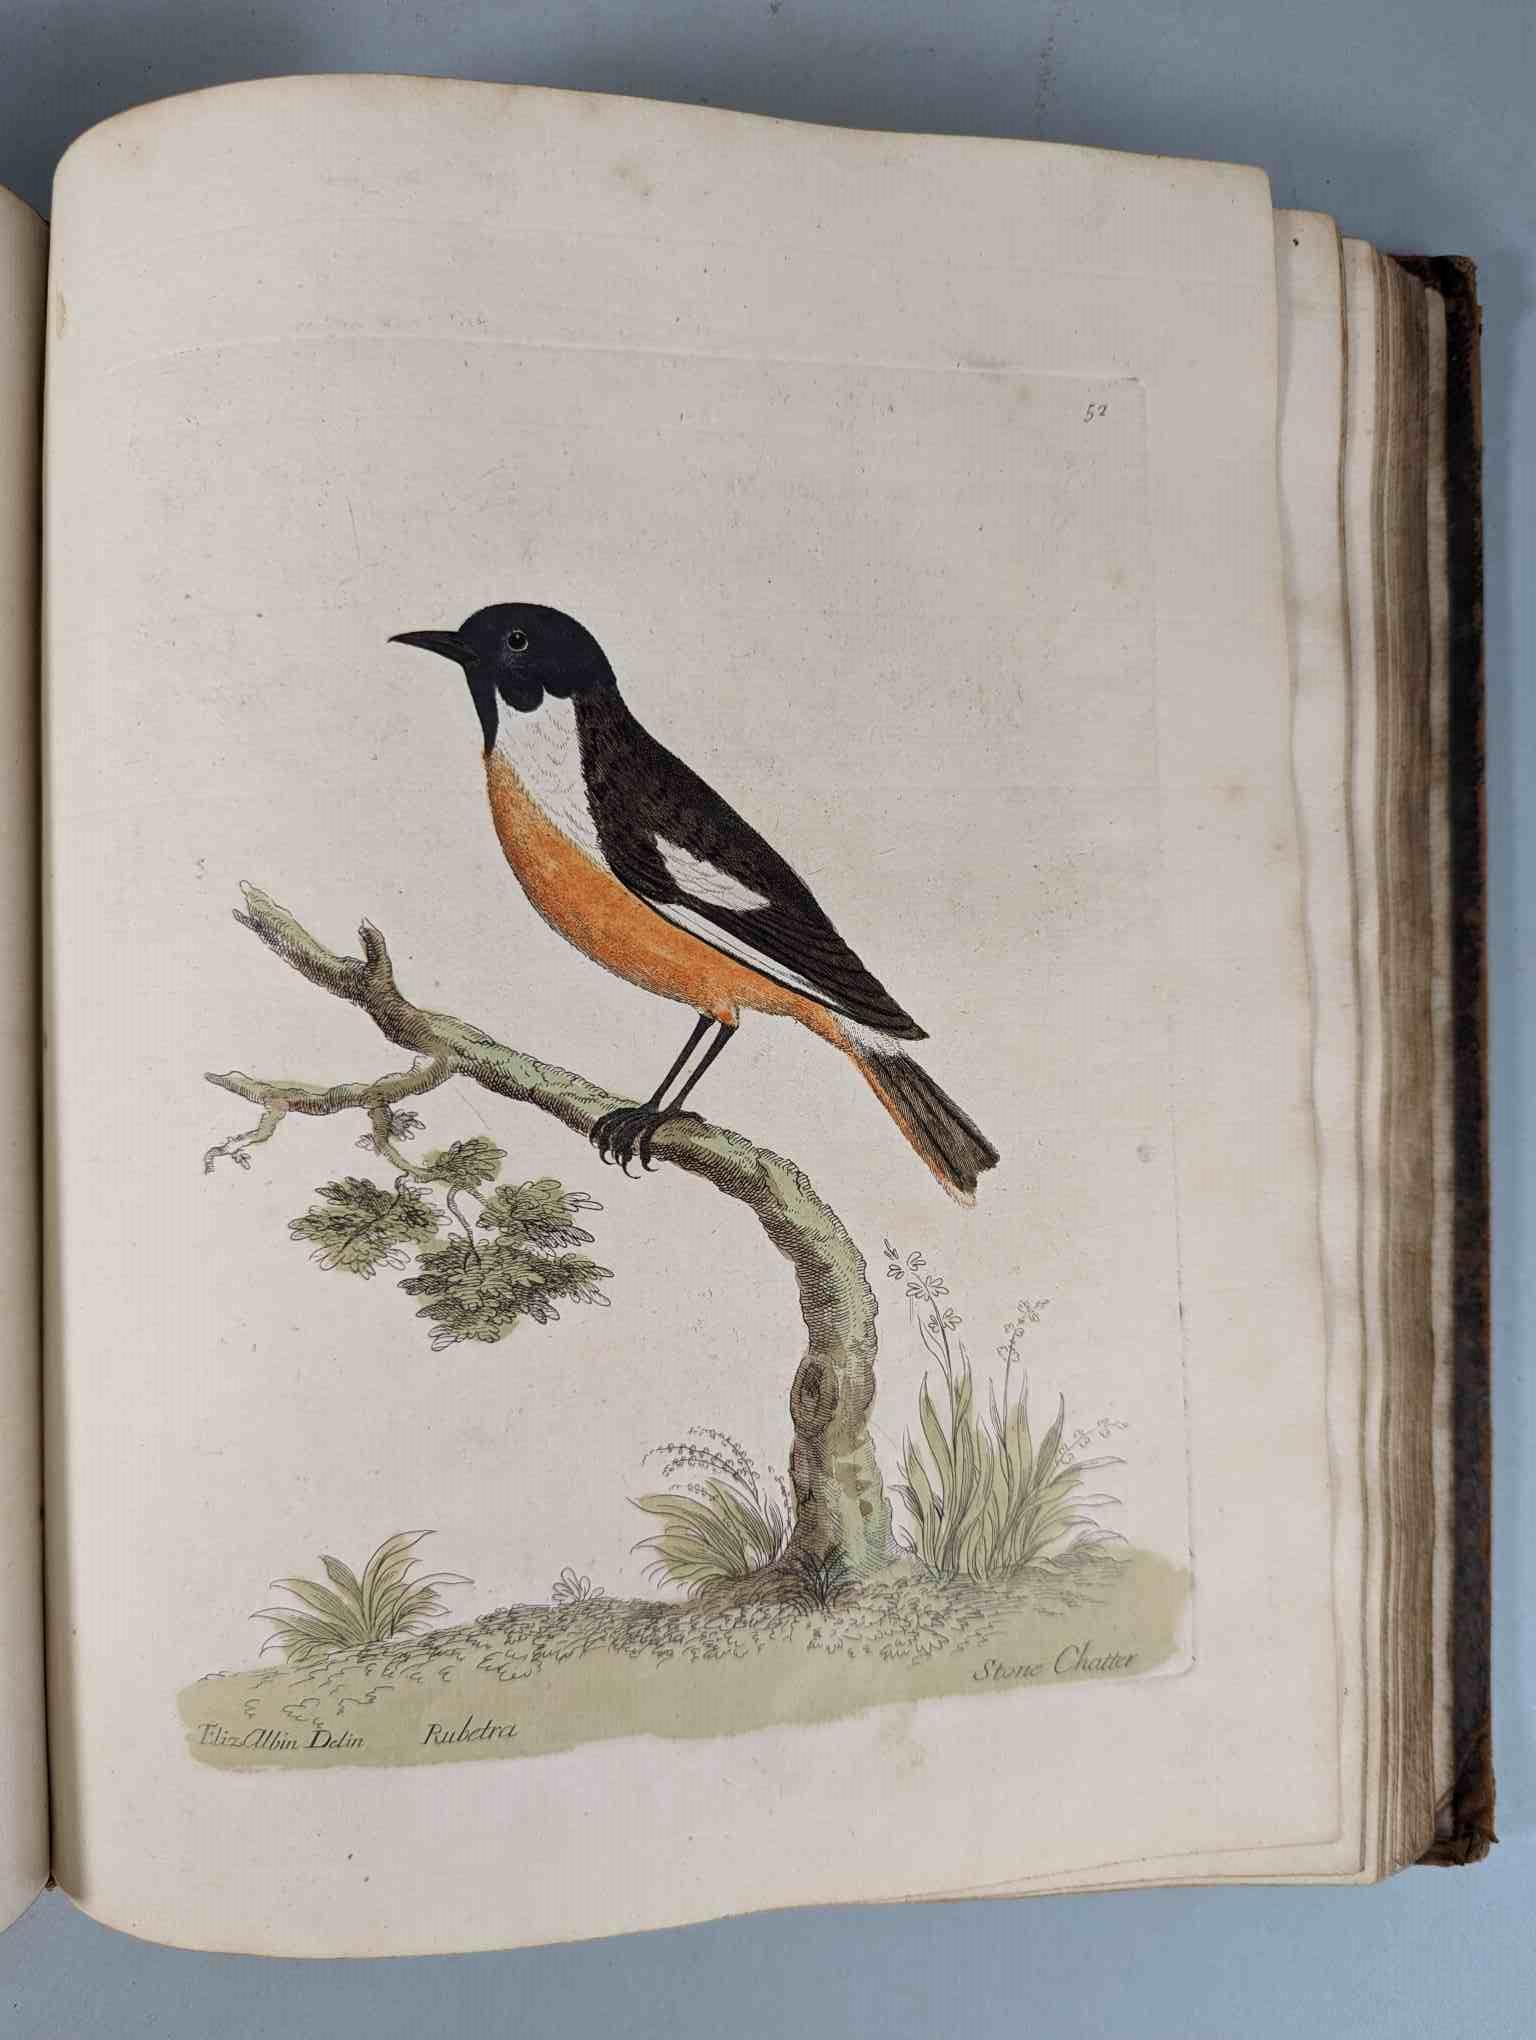 ALBIN, Eleazar. A Natural History of Birds, to which are added, Notes and Observations by W. - Image 55 of 208